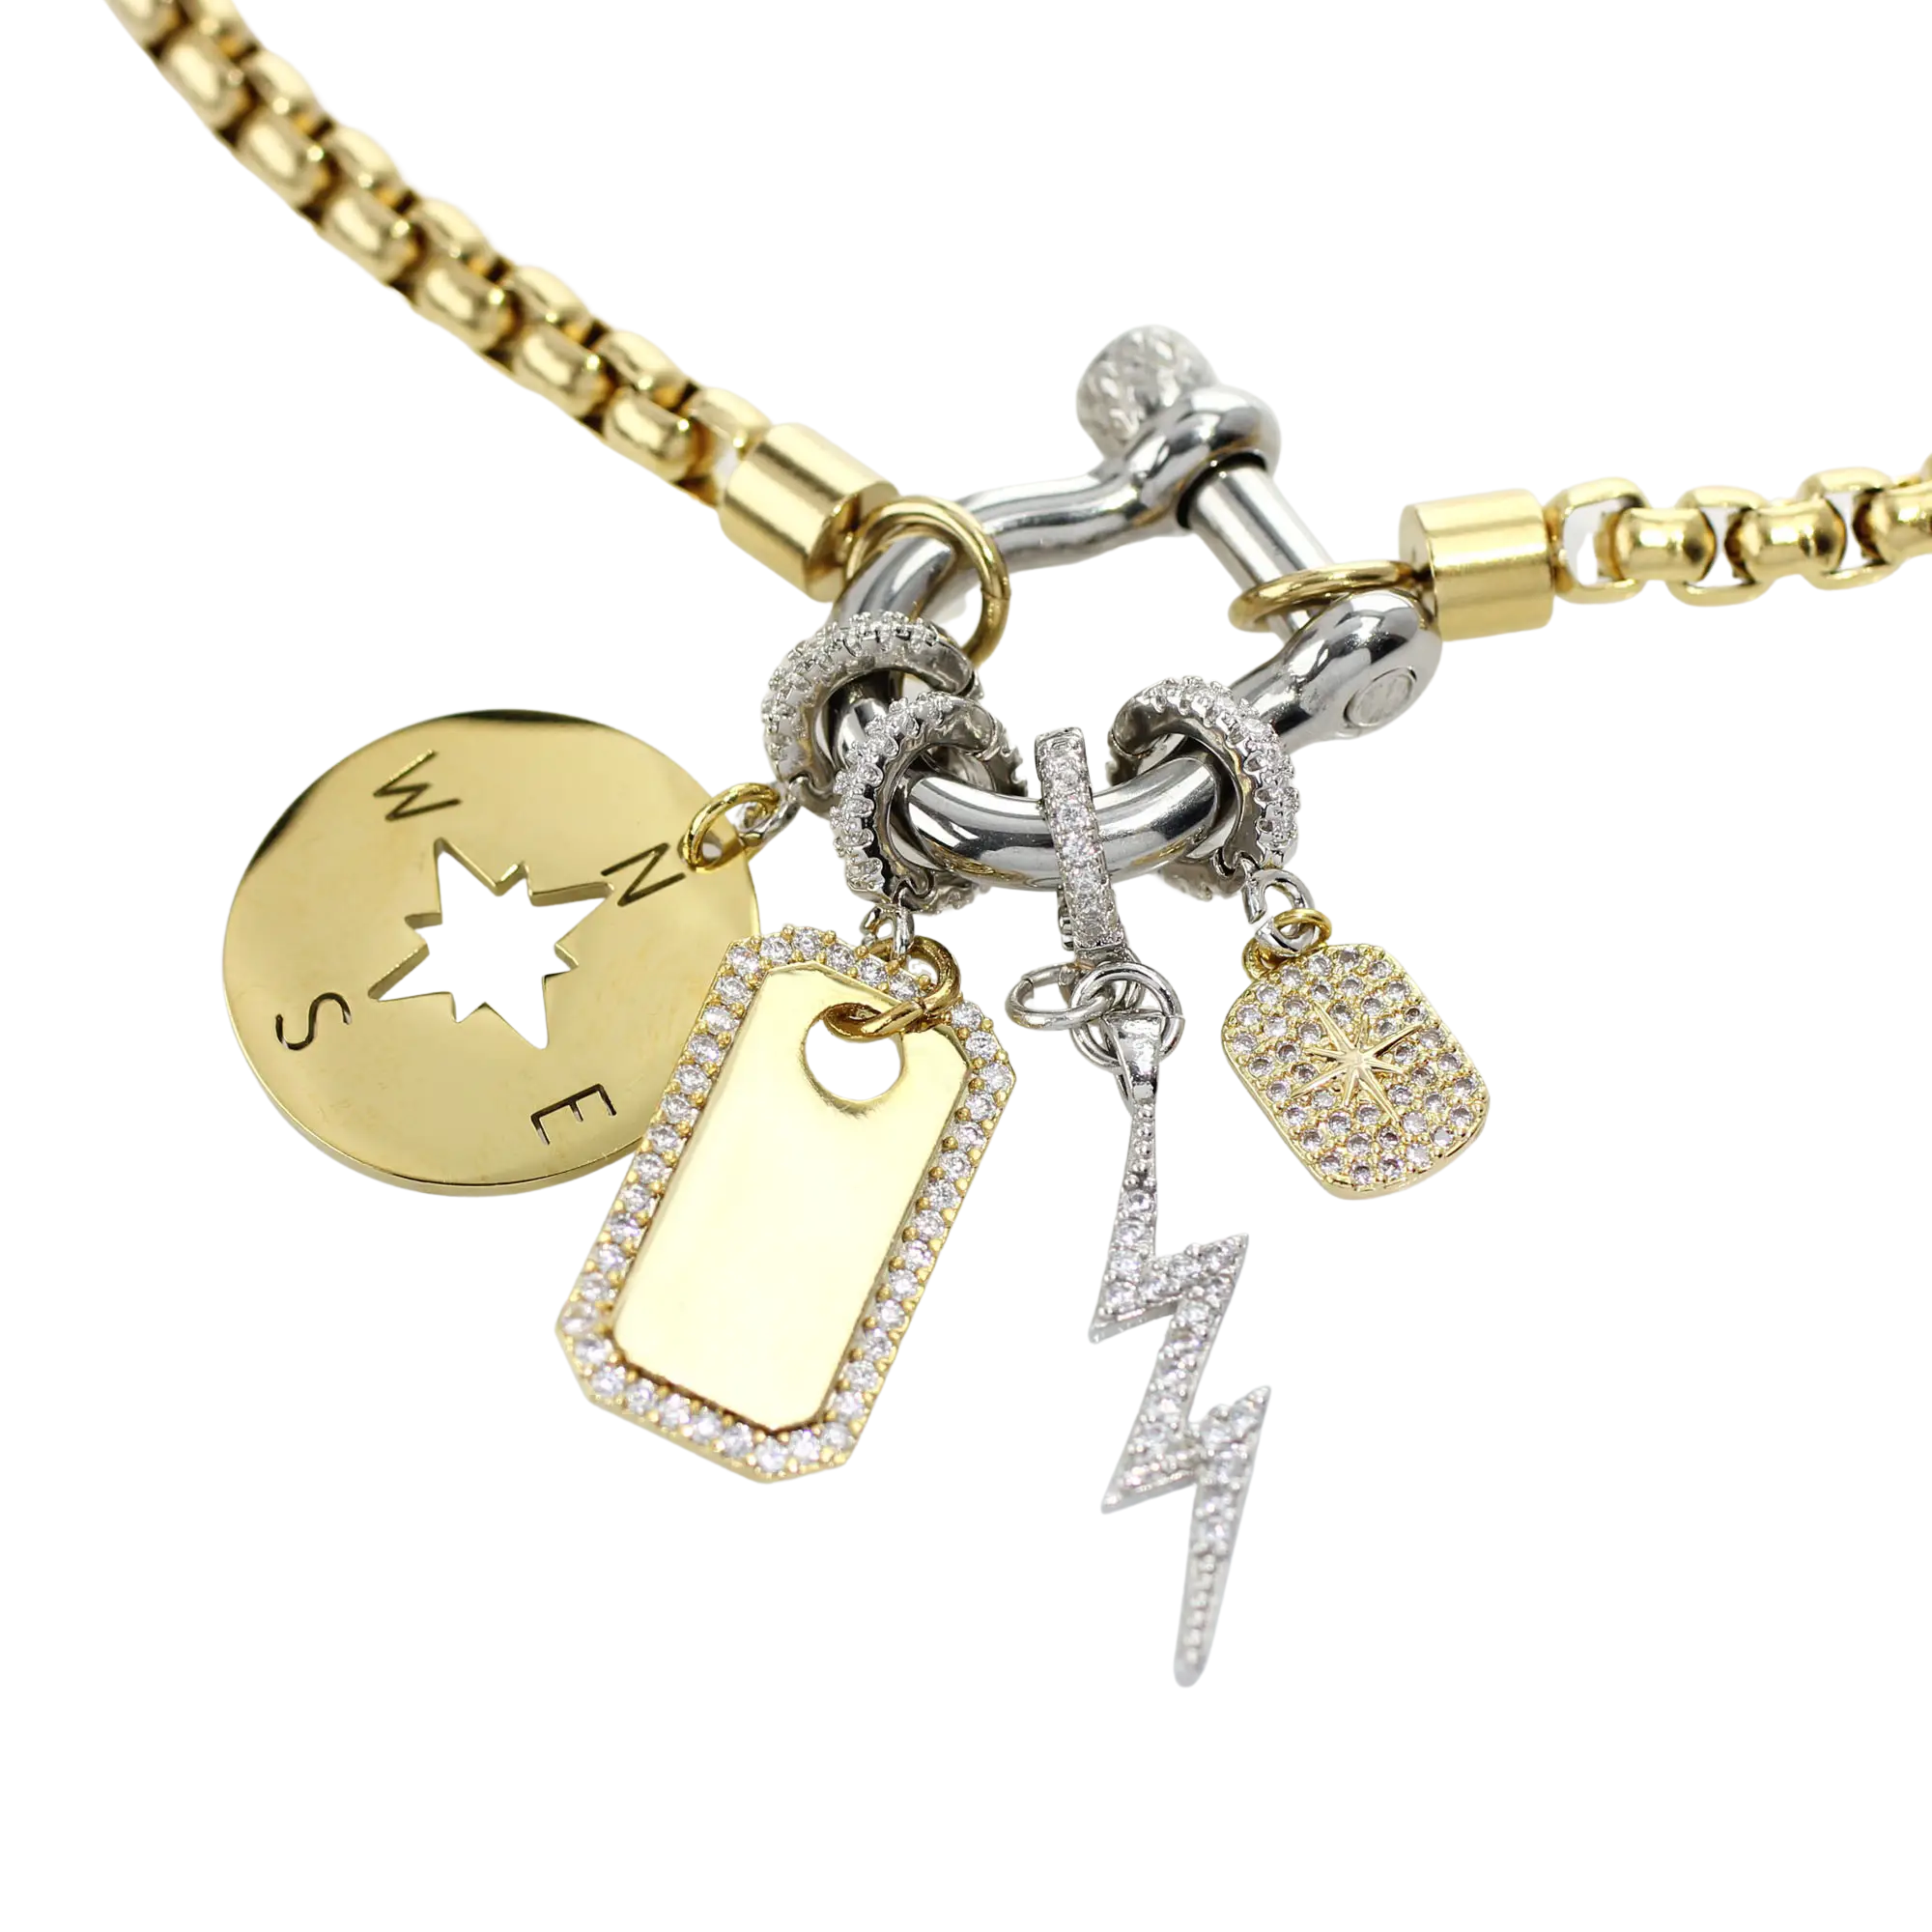 Louis Vuitton Necklace Pendant 18k Gold Love Key Made In France 100%  Authentic